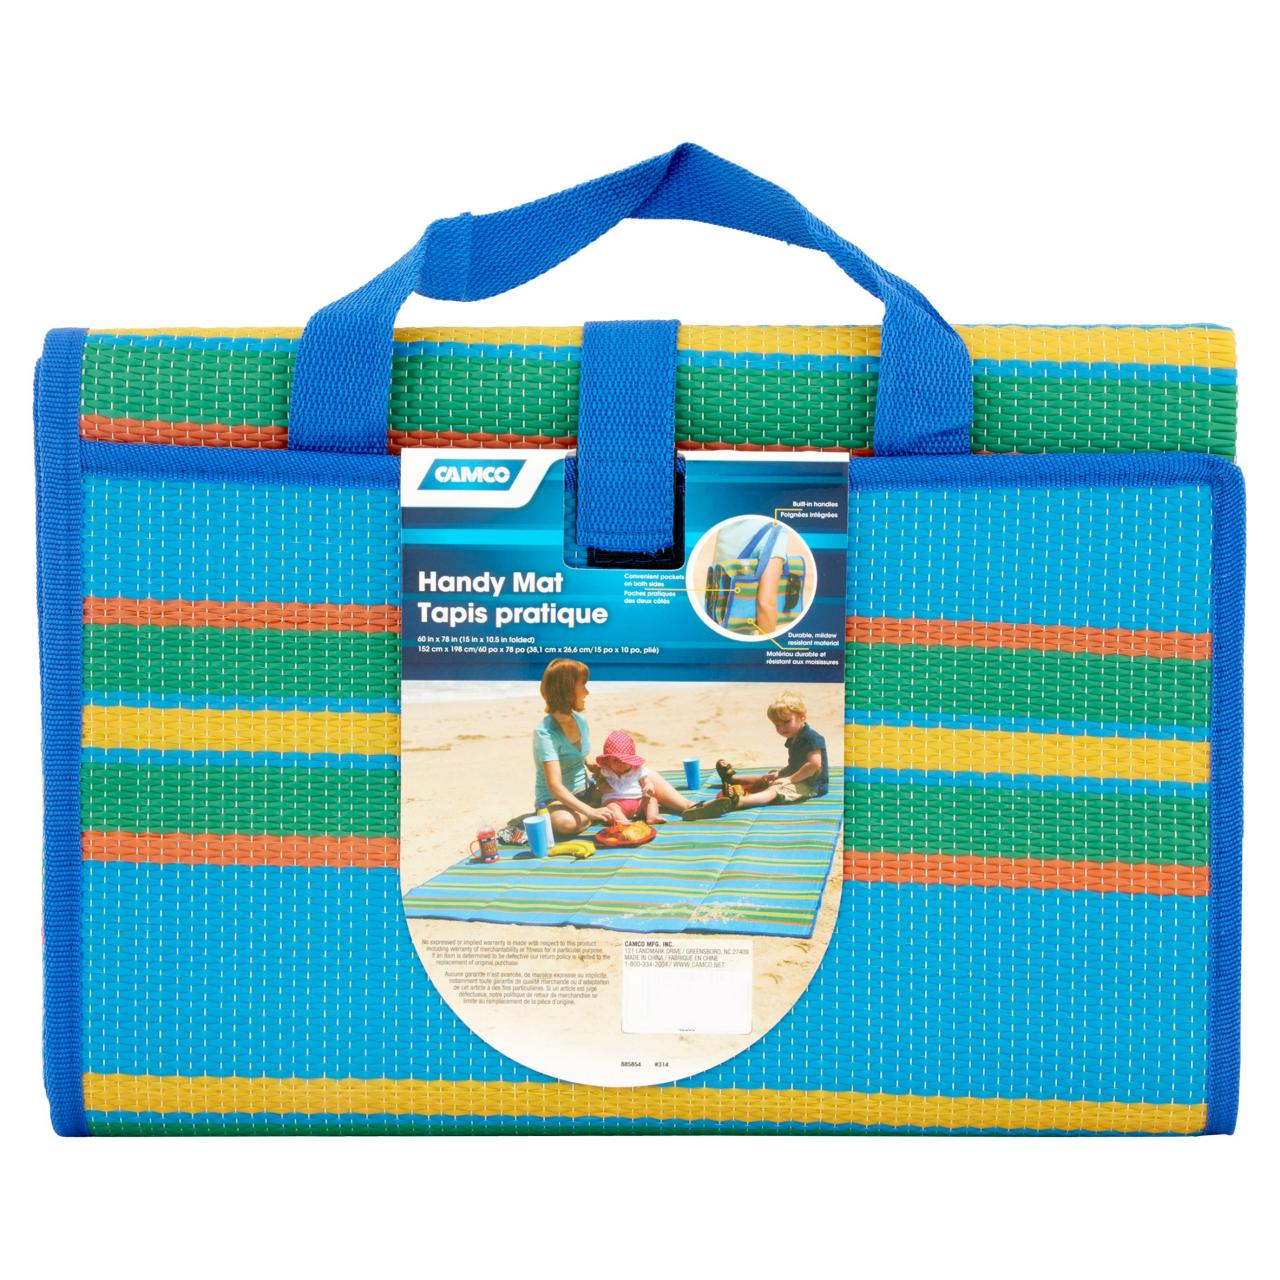 Amazon – Camco Handy Mat with Strap just .09! - FamilySavings